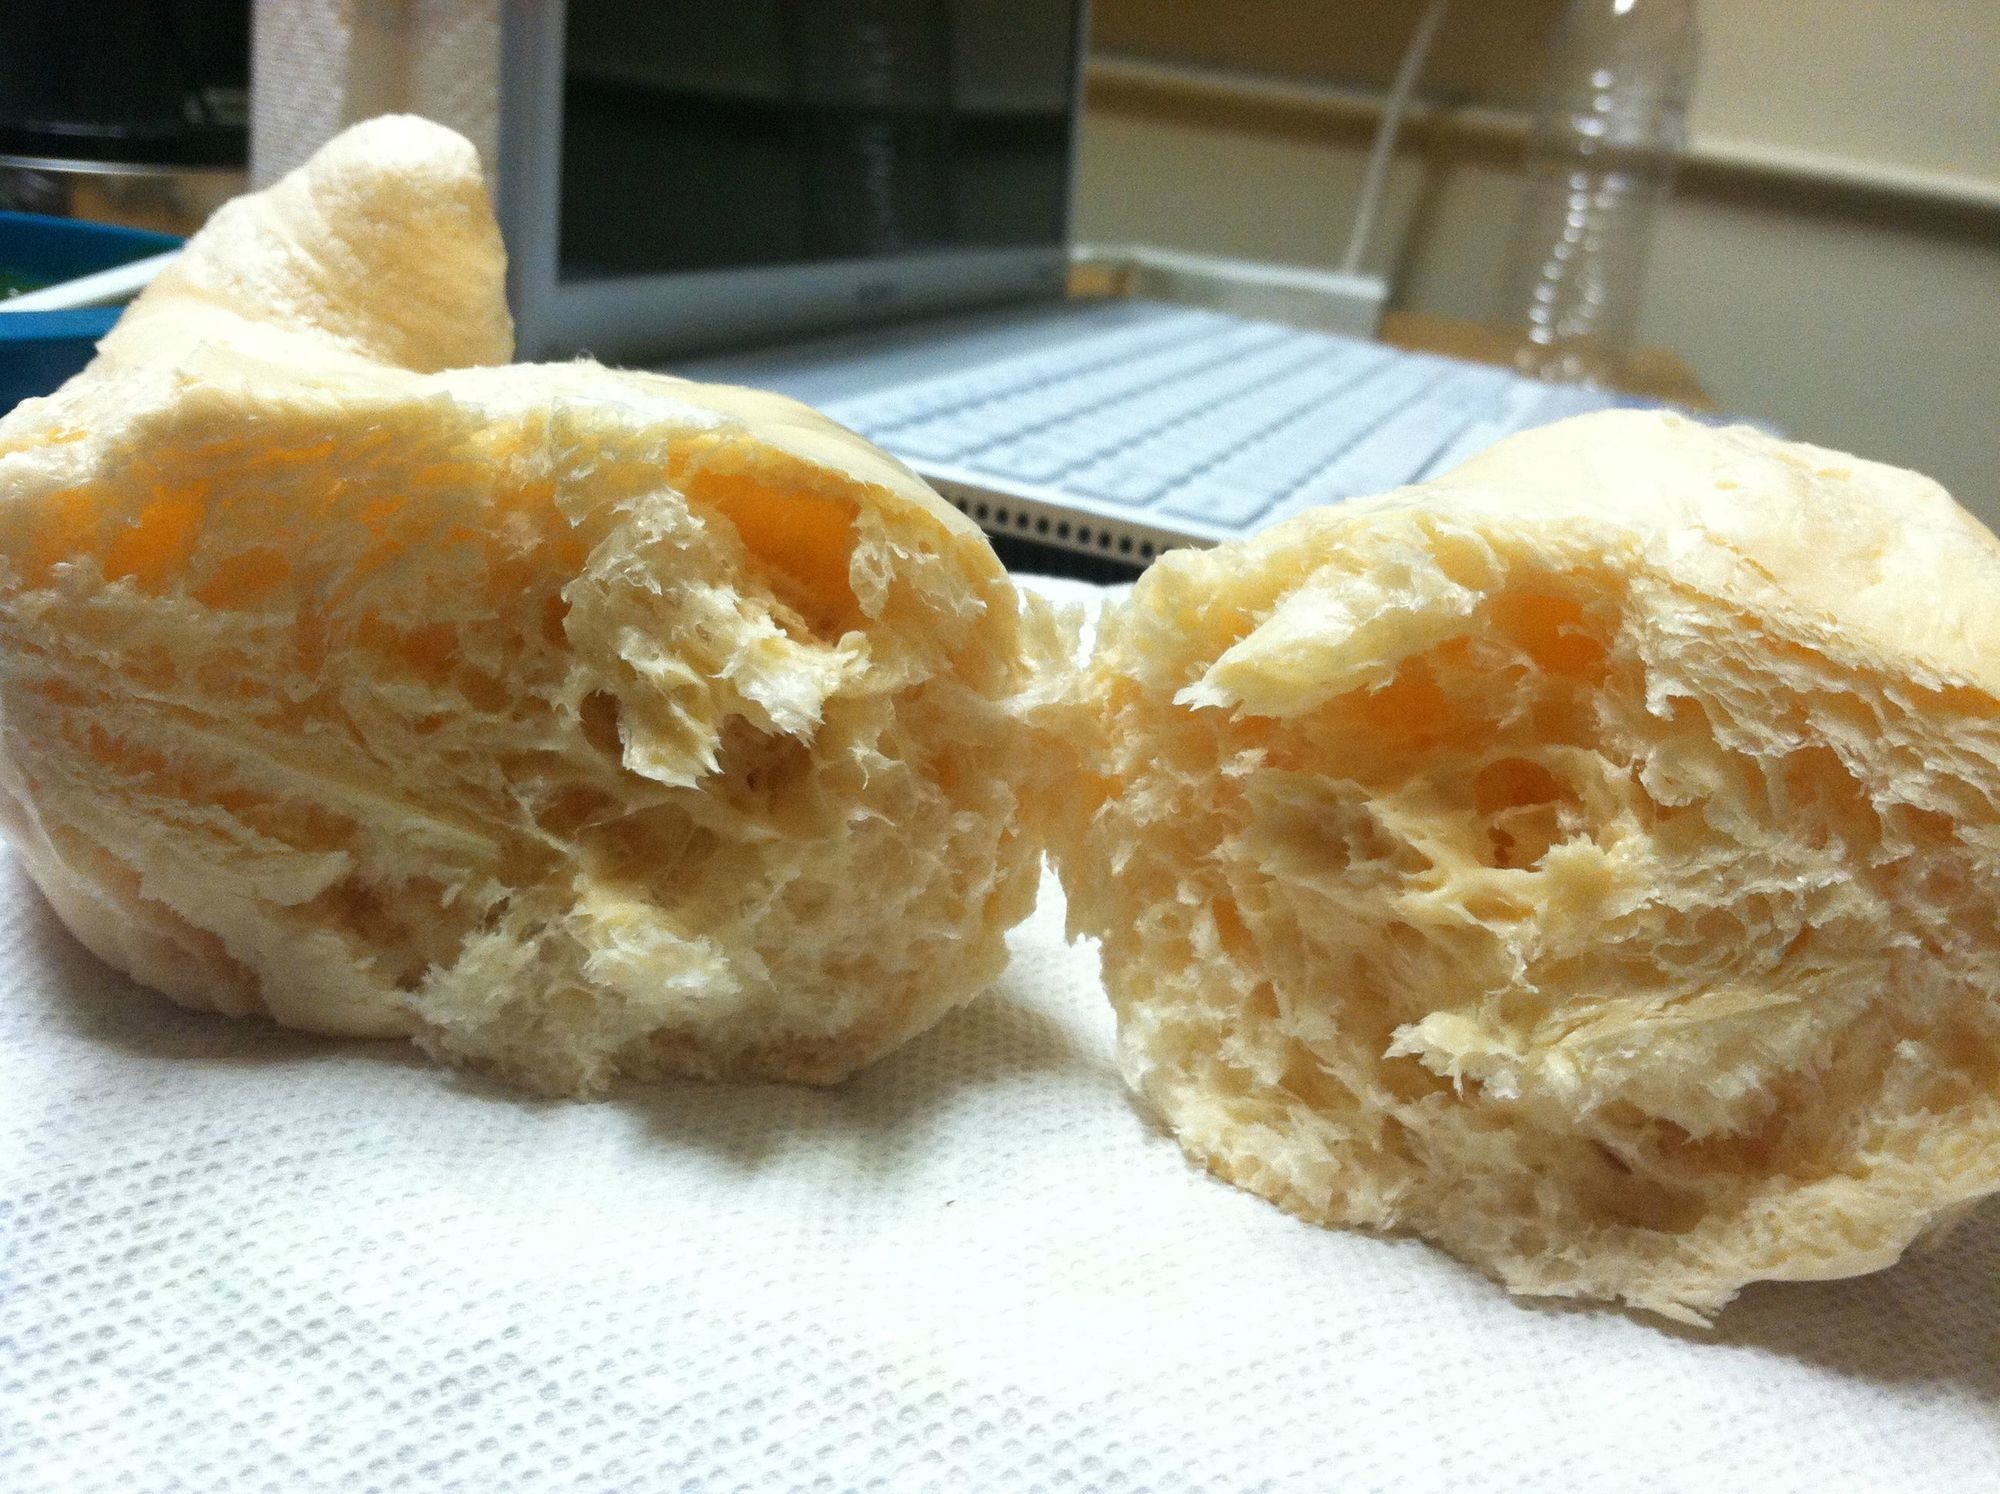 This looks like bread, but it's actually a piece of microwaved soap.